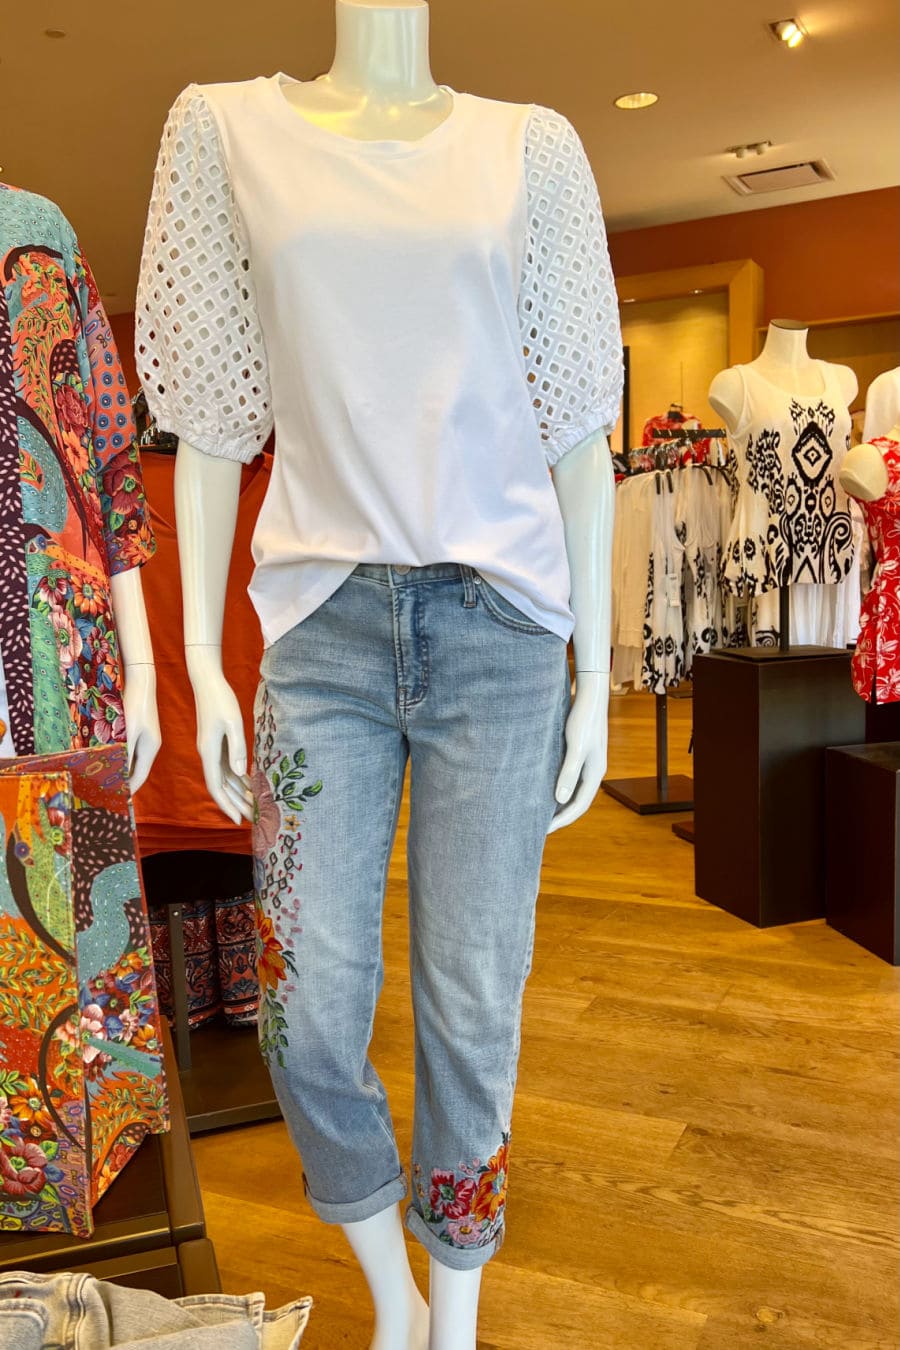 mannequin modeling eylet top and jeans with embroidery